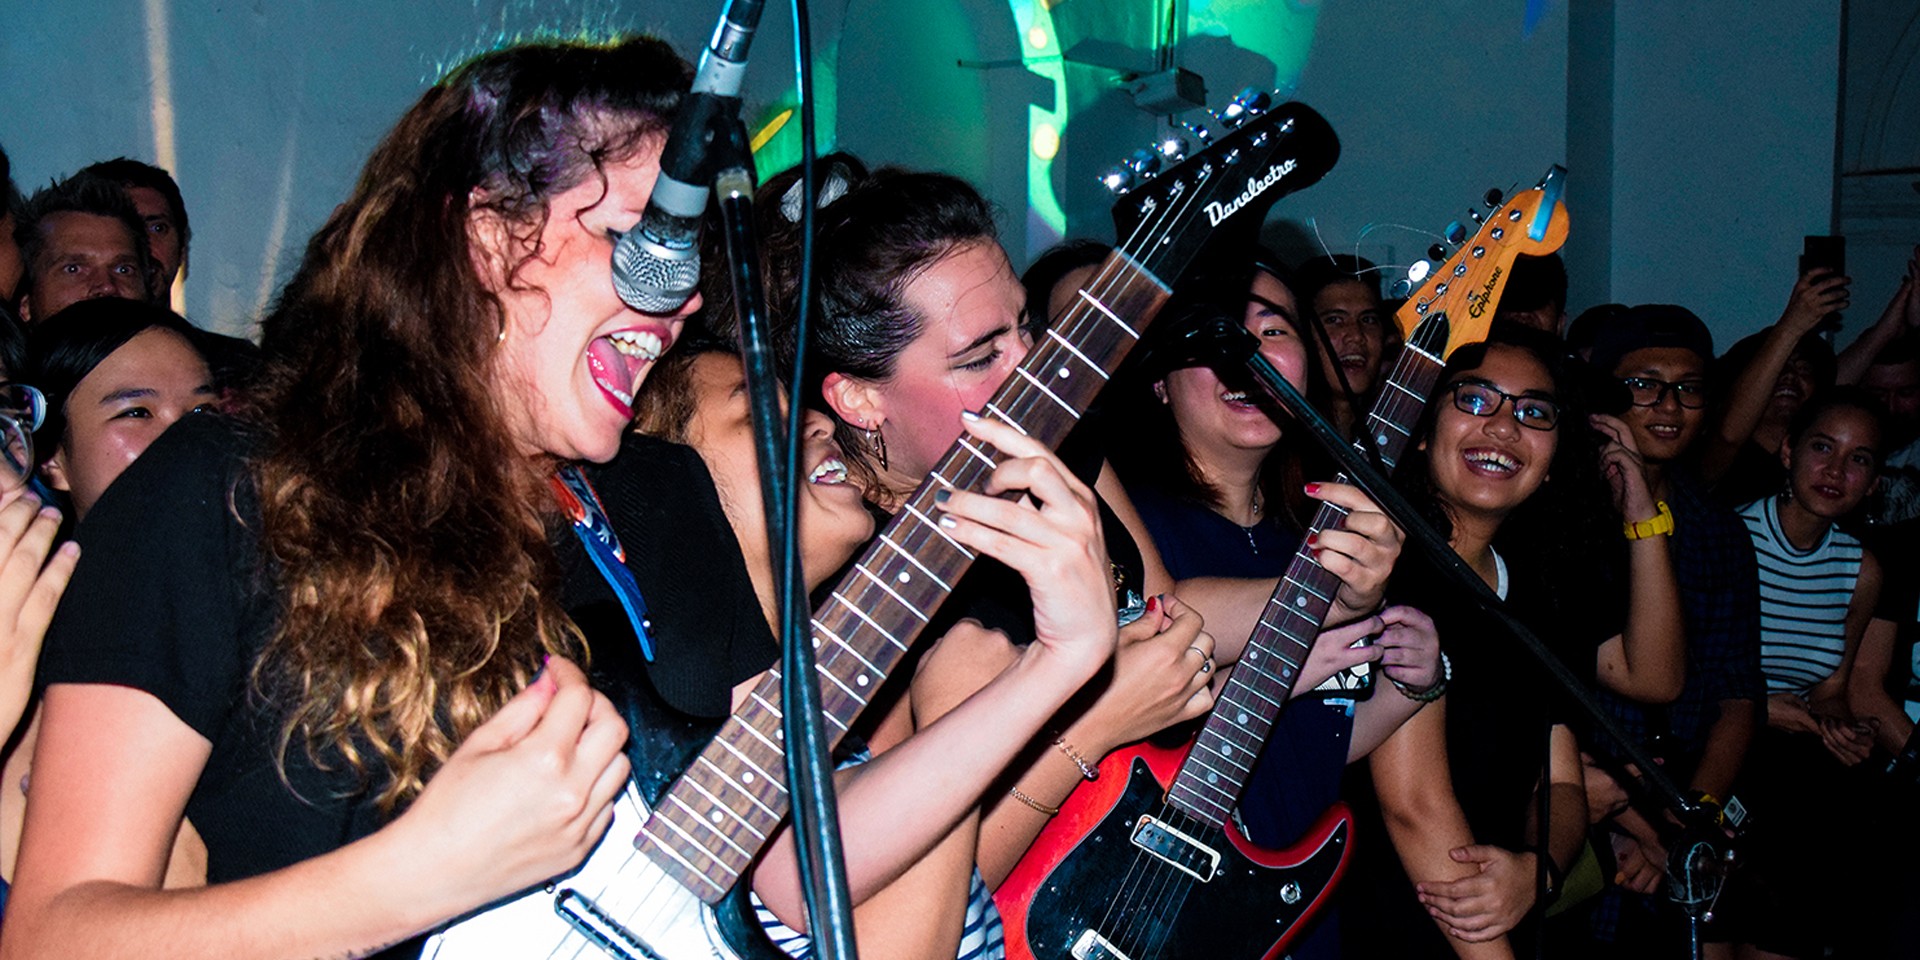 GIG REPORT: Hinds' first show in Singapore a sweaty, raucous affair